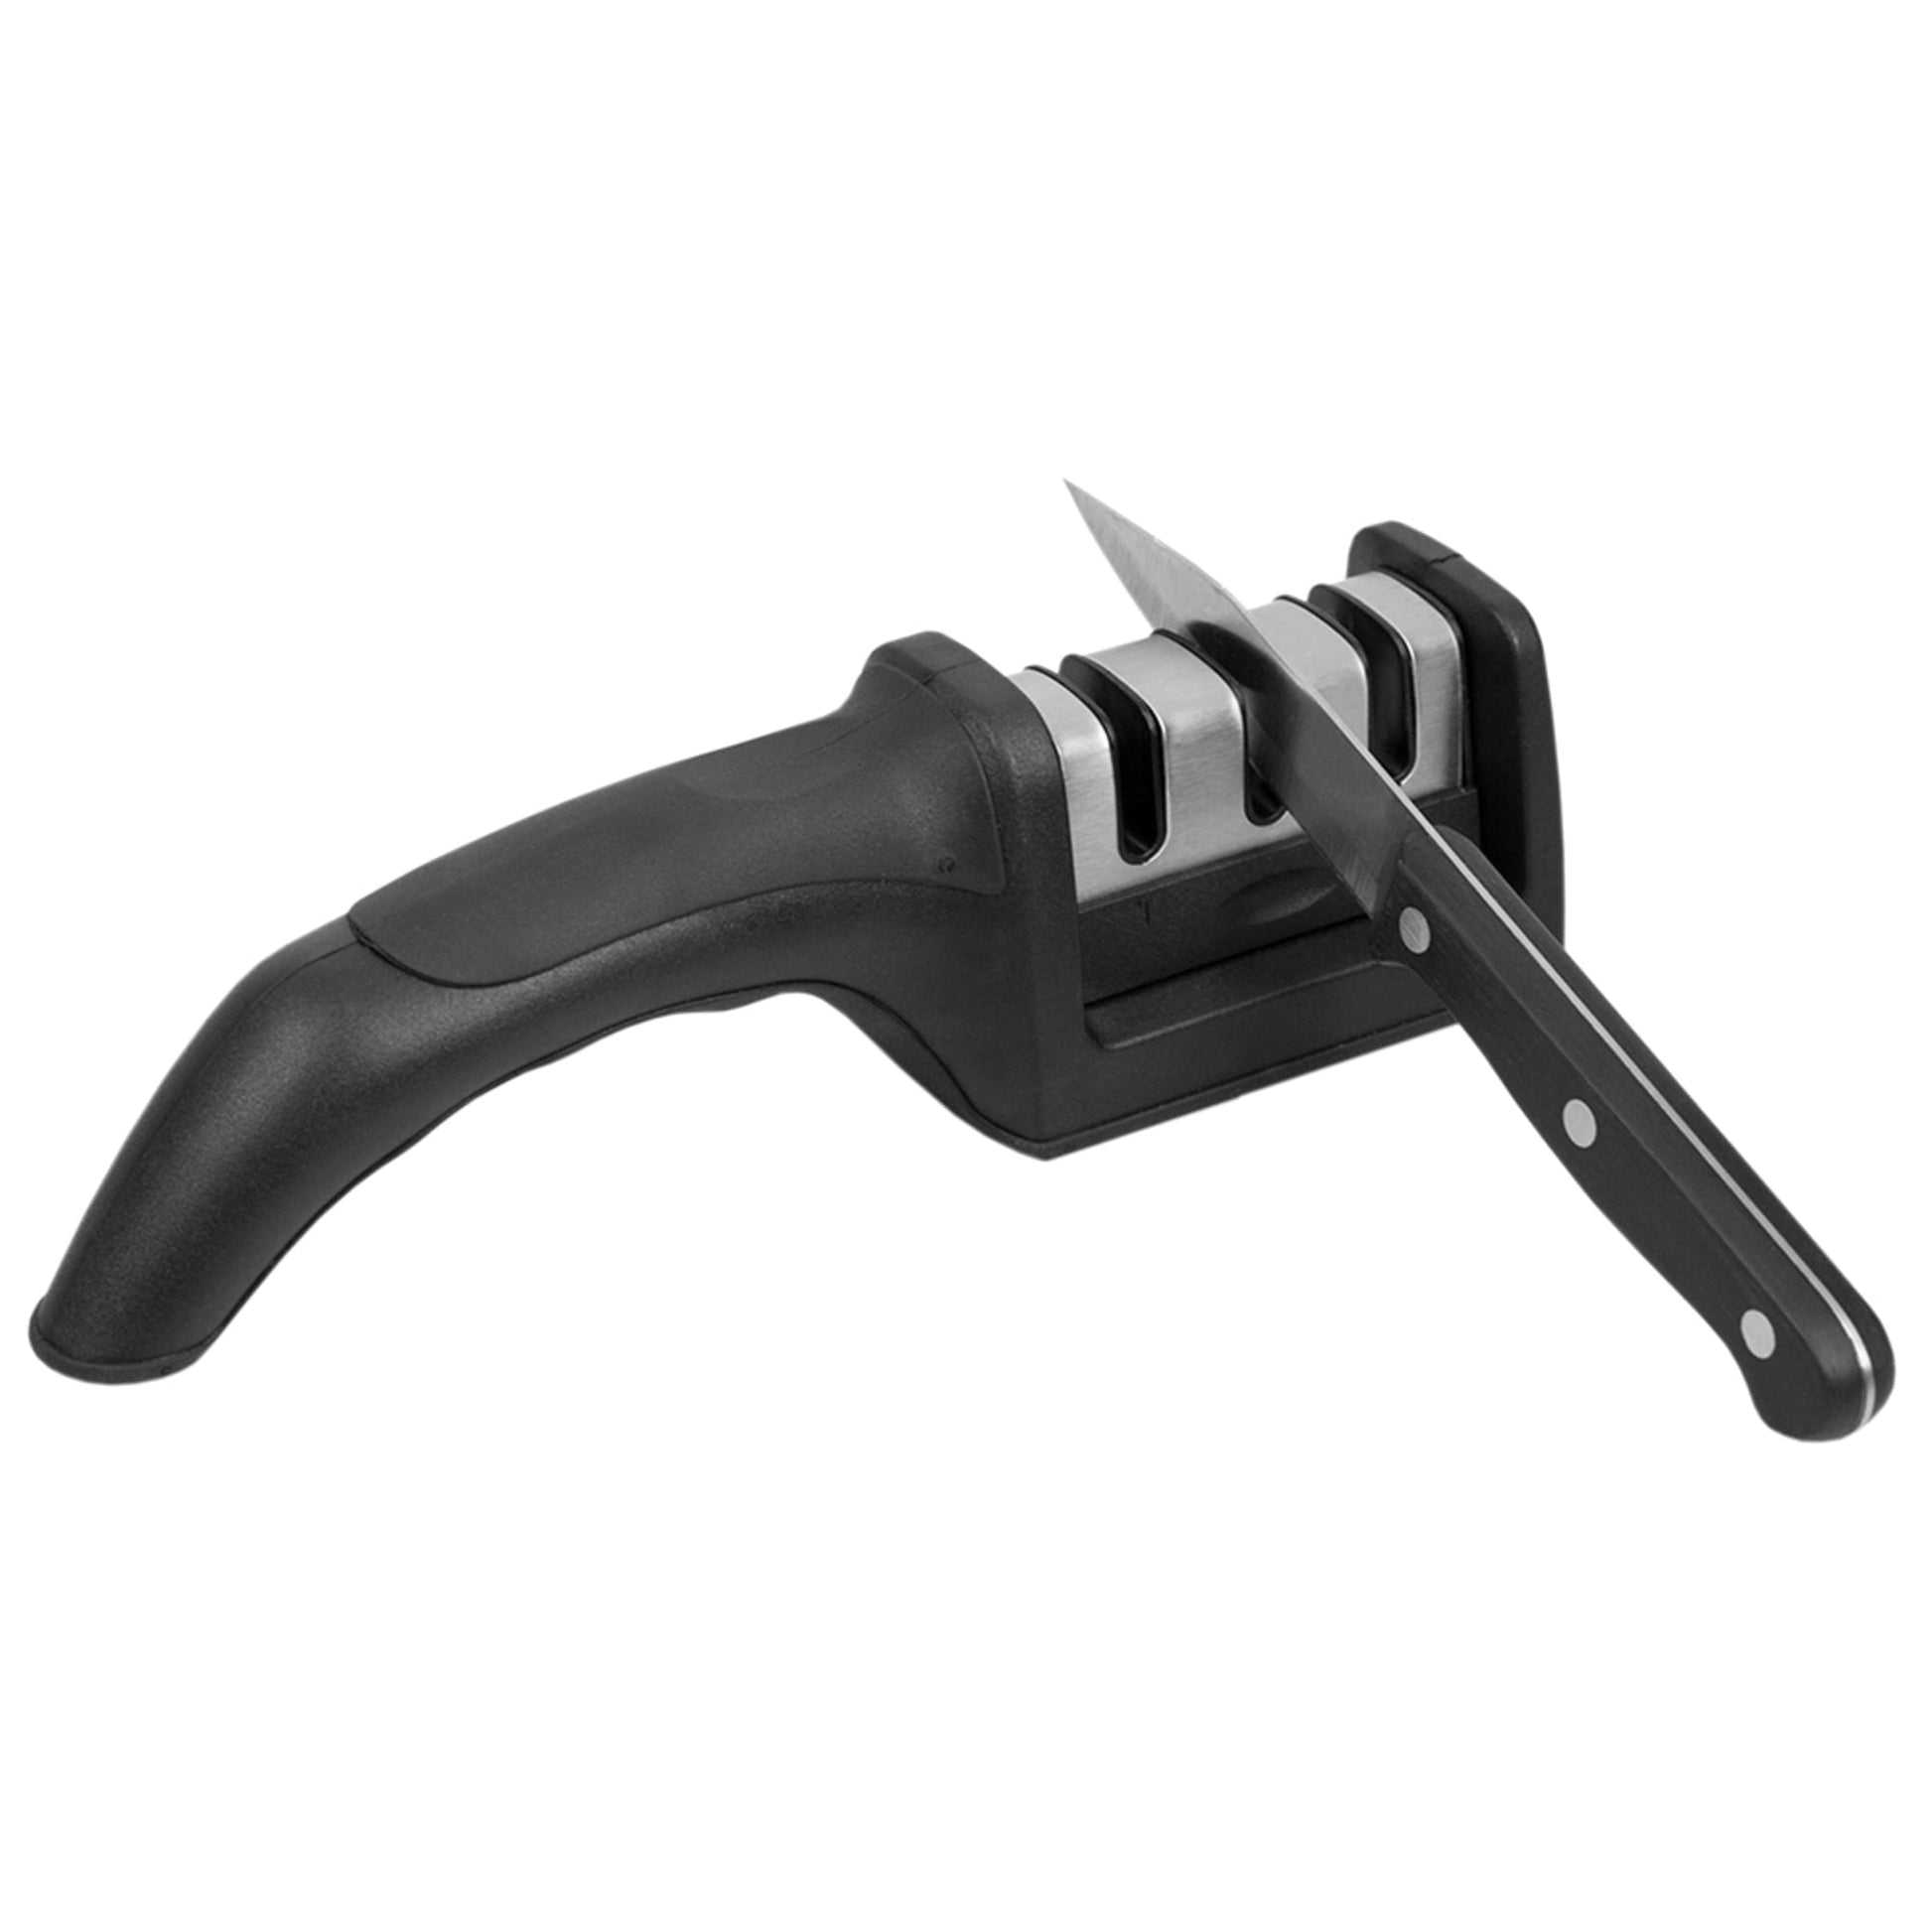 The Kitchenellence 3-Stage Knife Sharpener Is 47% Off at